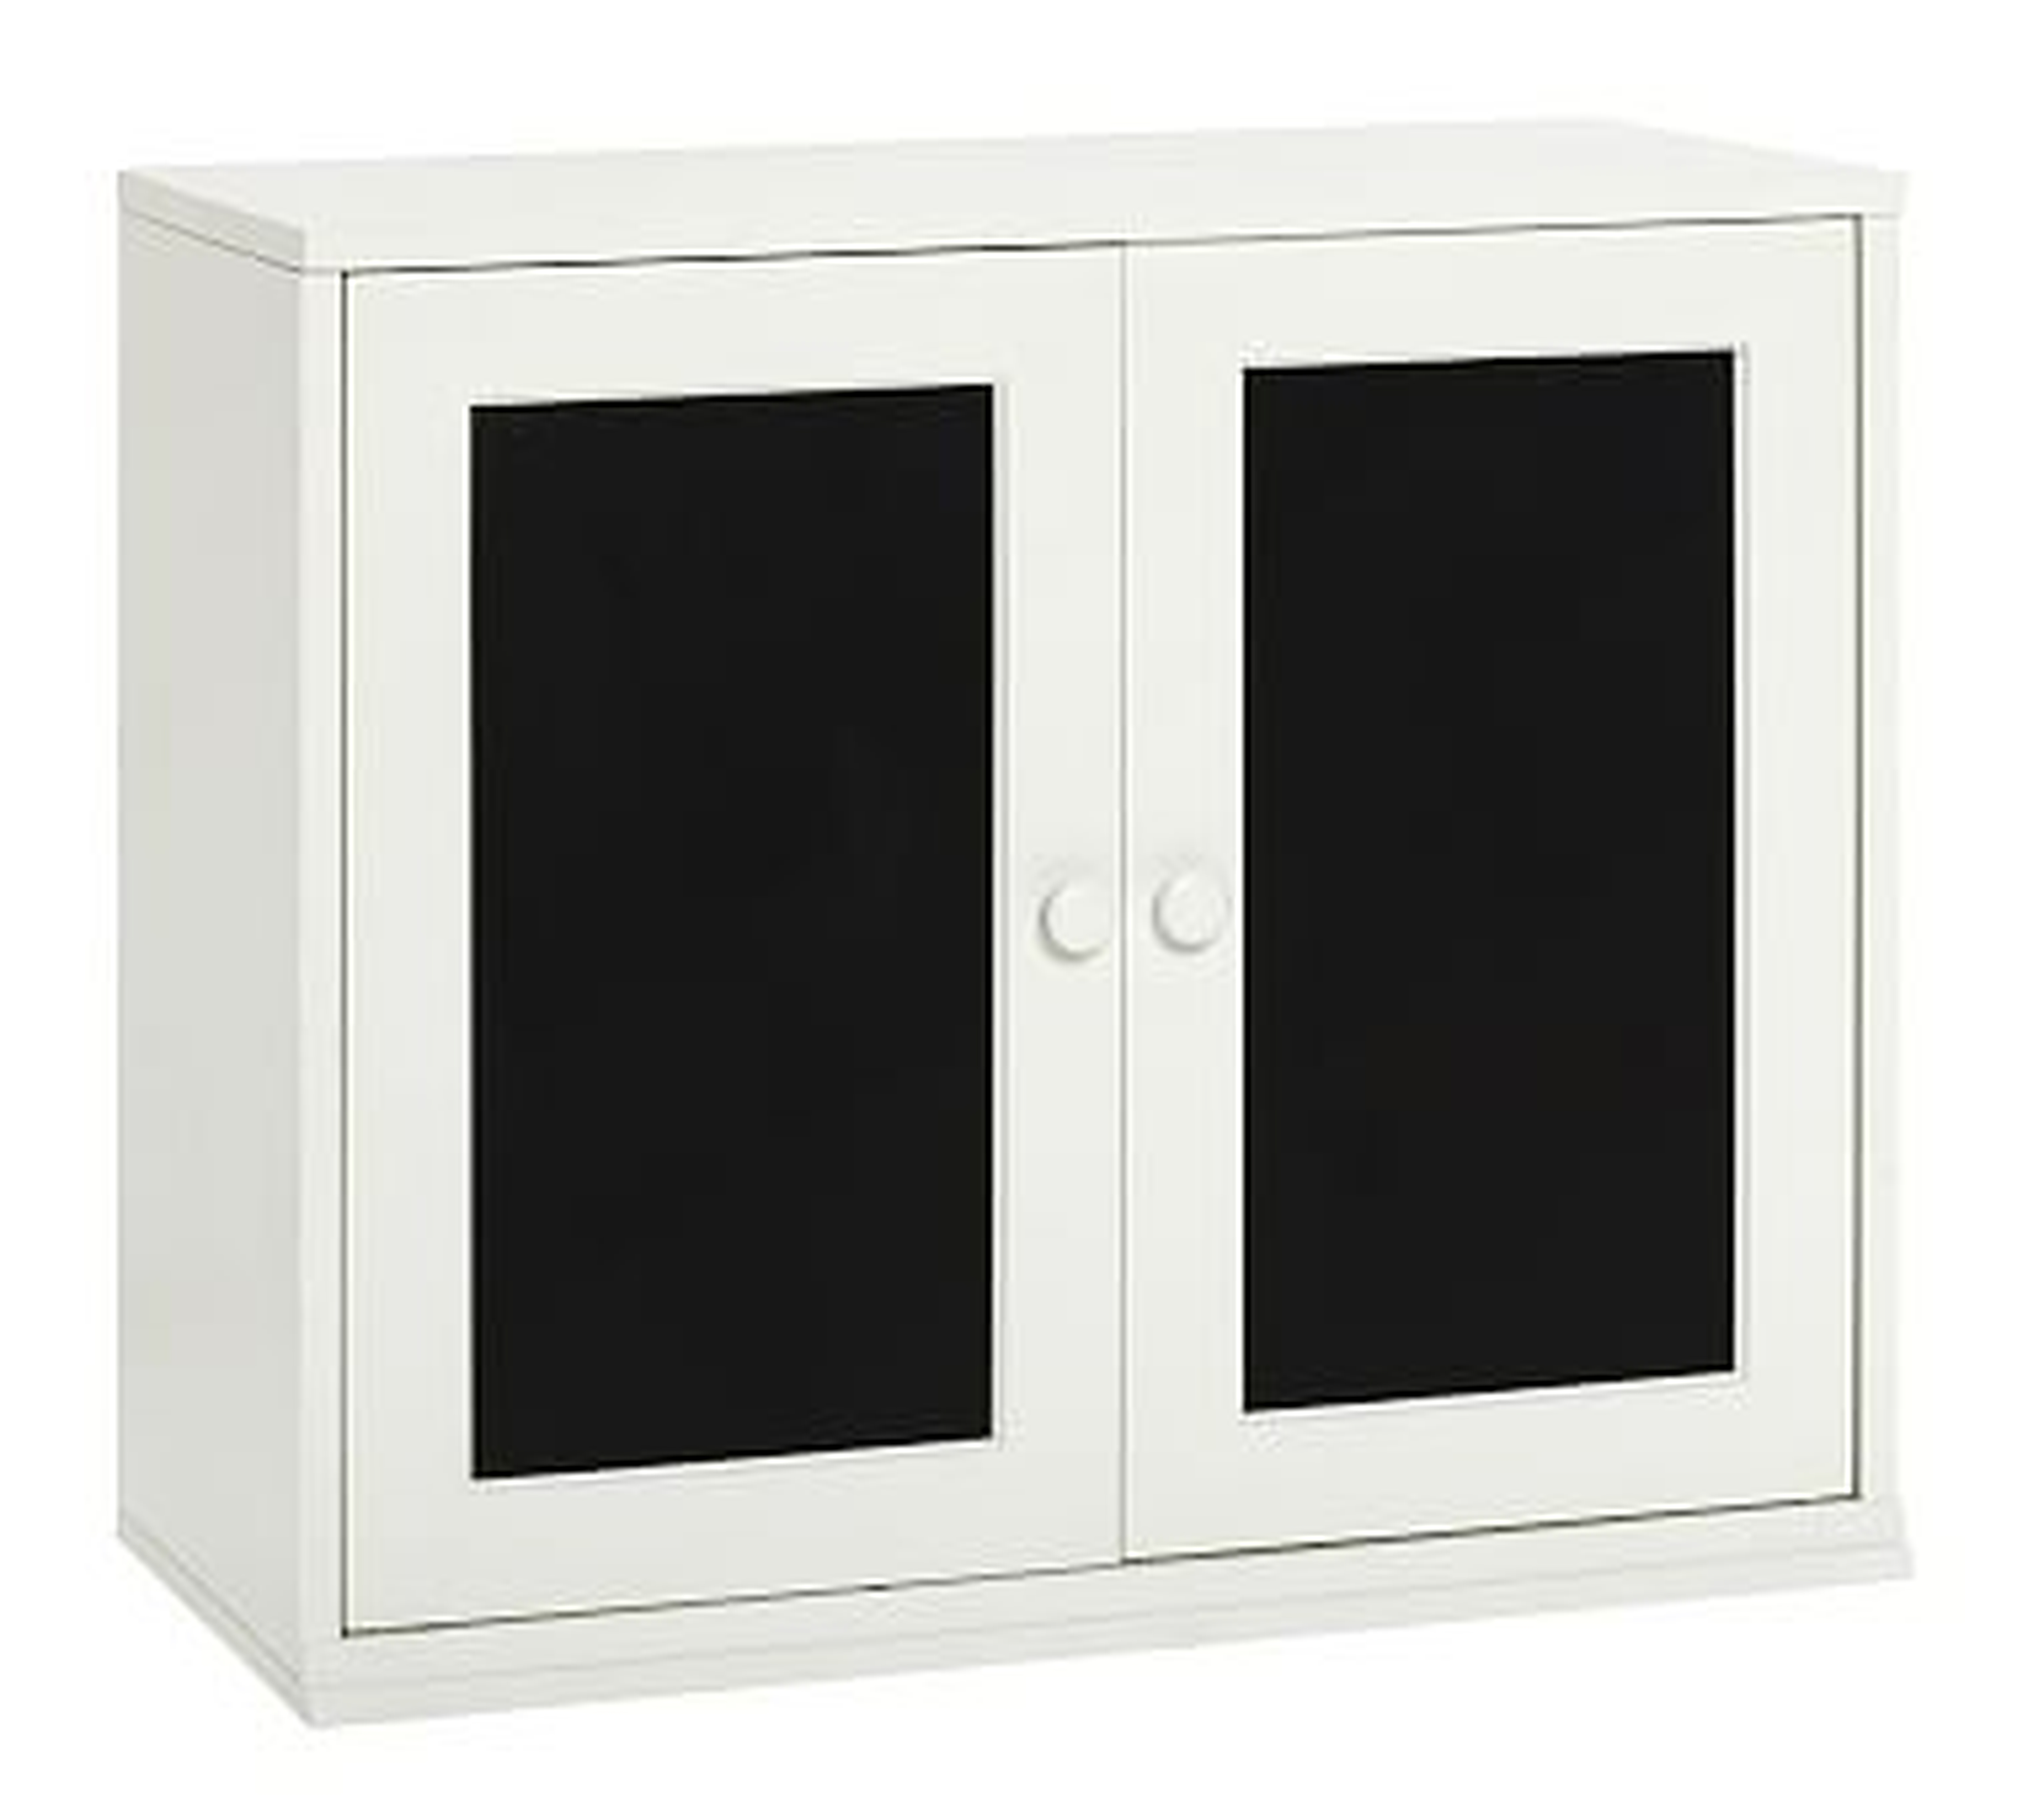 Cameron Chalkboard Cabinet, Simply White, In-Home Delivery - Pottery Barn Kids